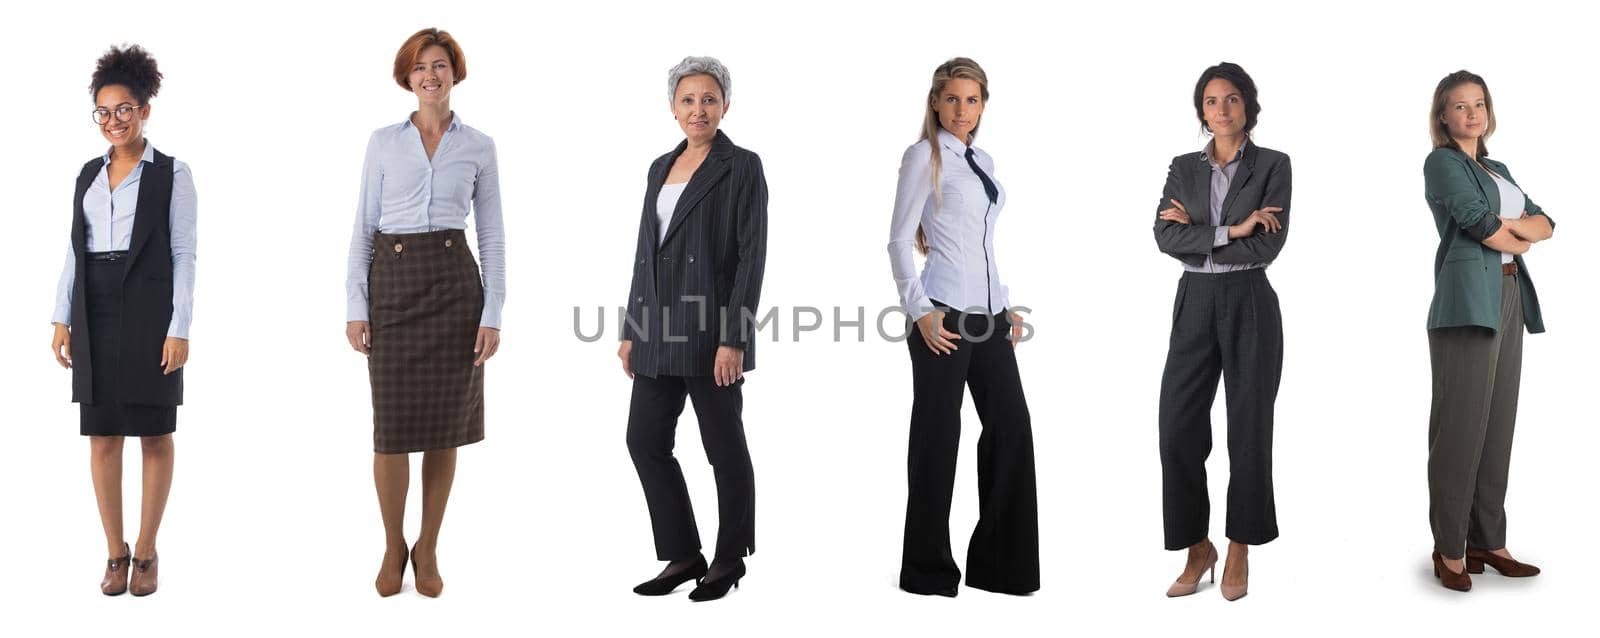 Business women portraits on white by ALotOfPeople